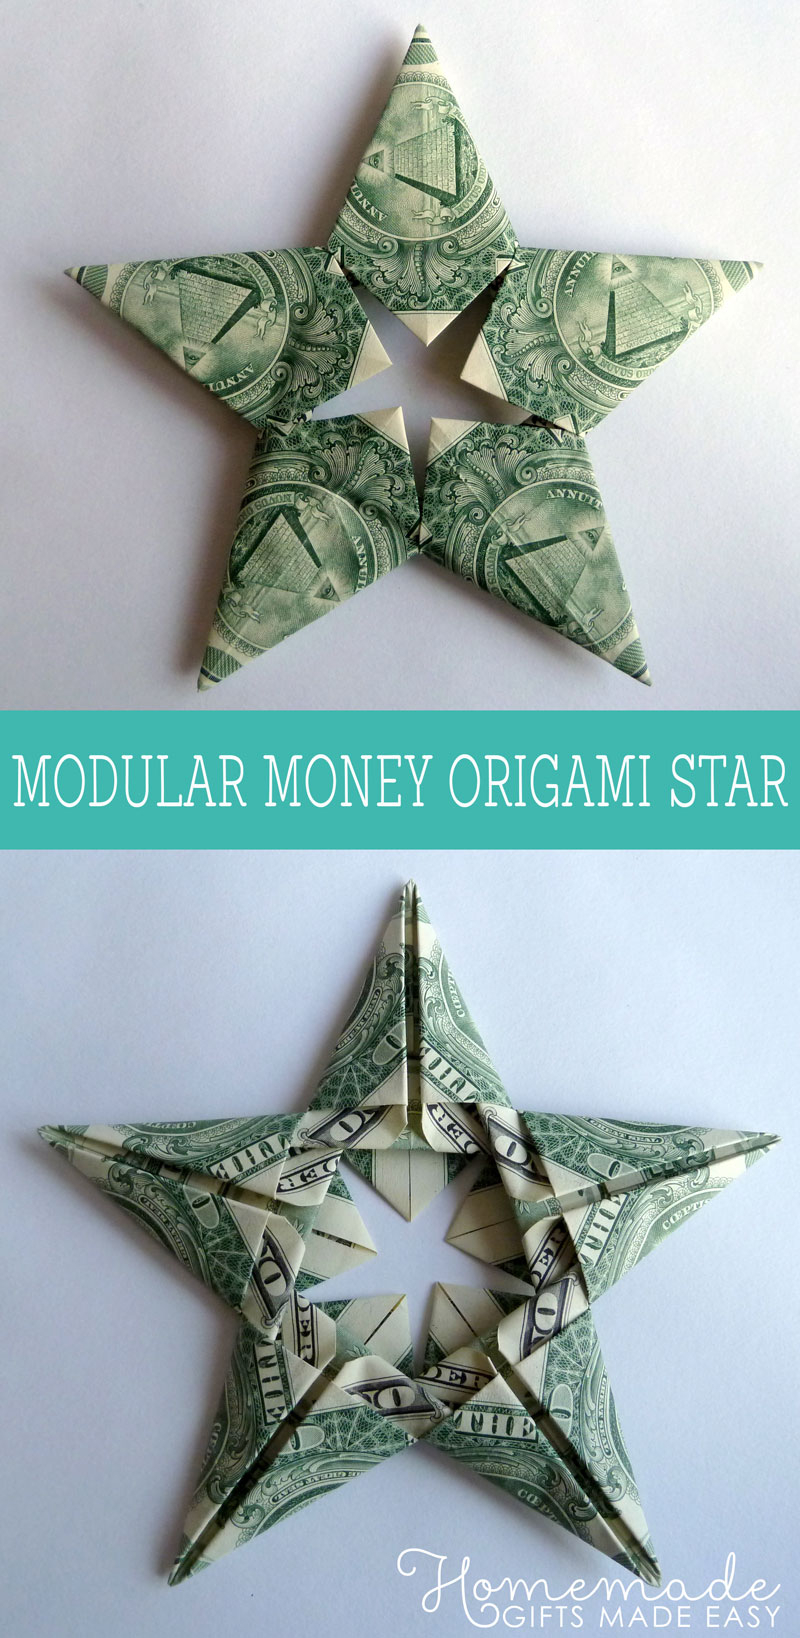 Origami Star How To Modular Money Origami Star From 5 Bills How To Fold Step Step